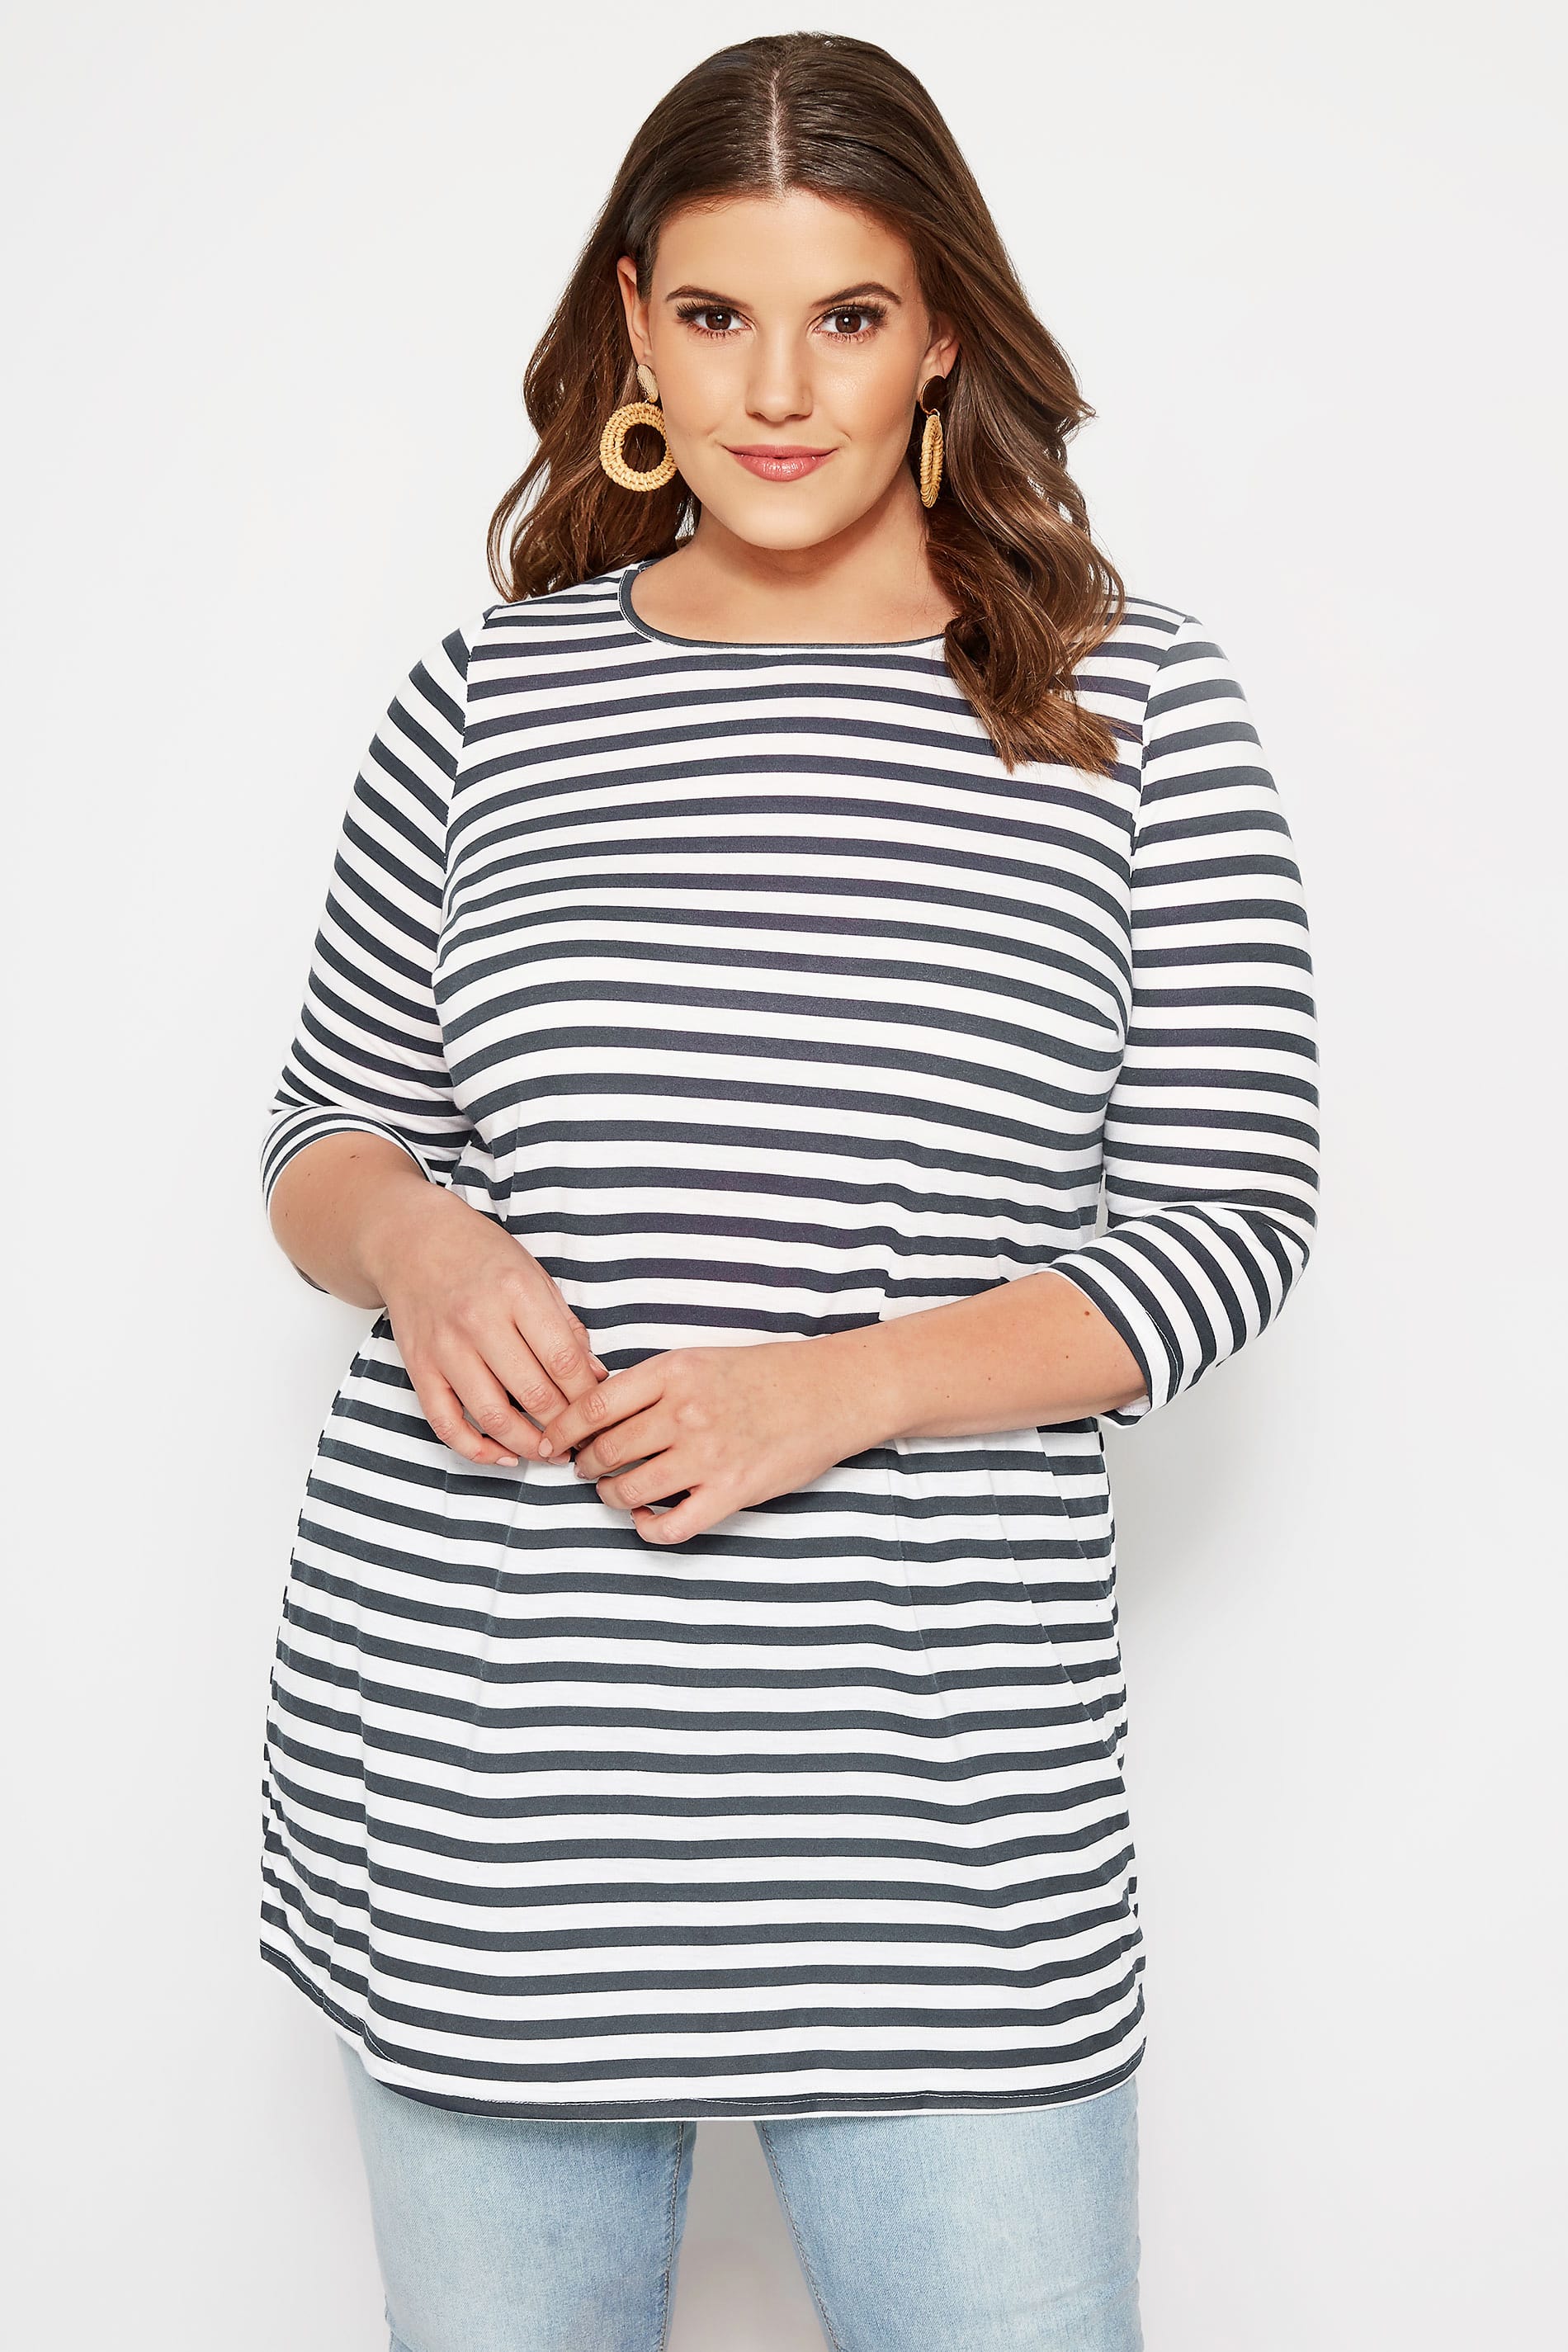 SIZE UP Navy White Striped Longline Top 170916 0875 